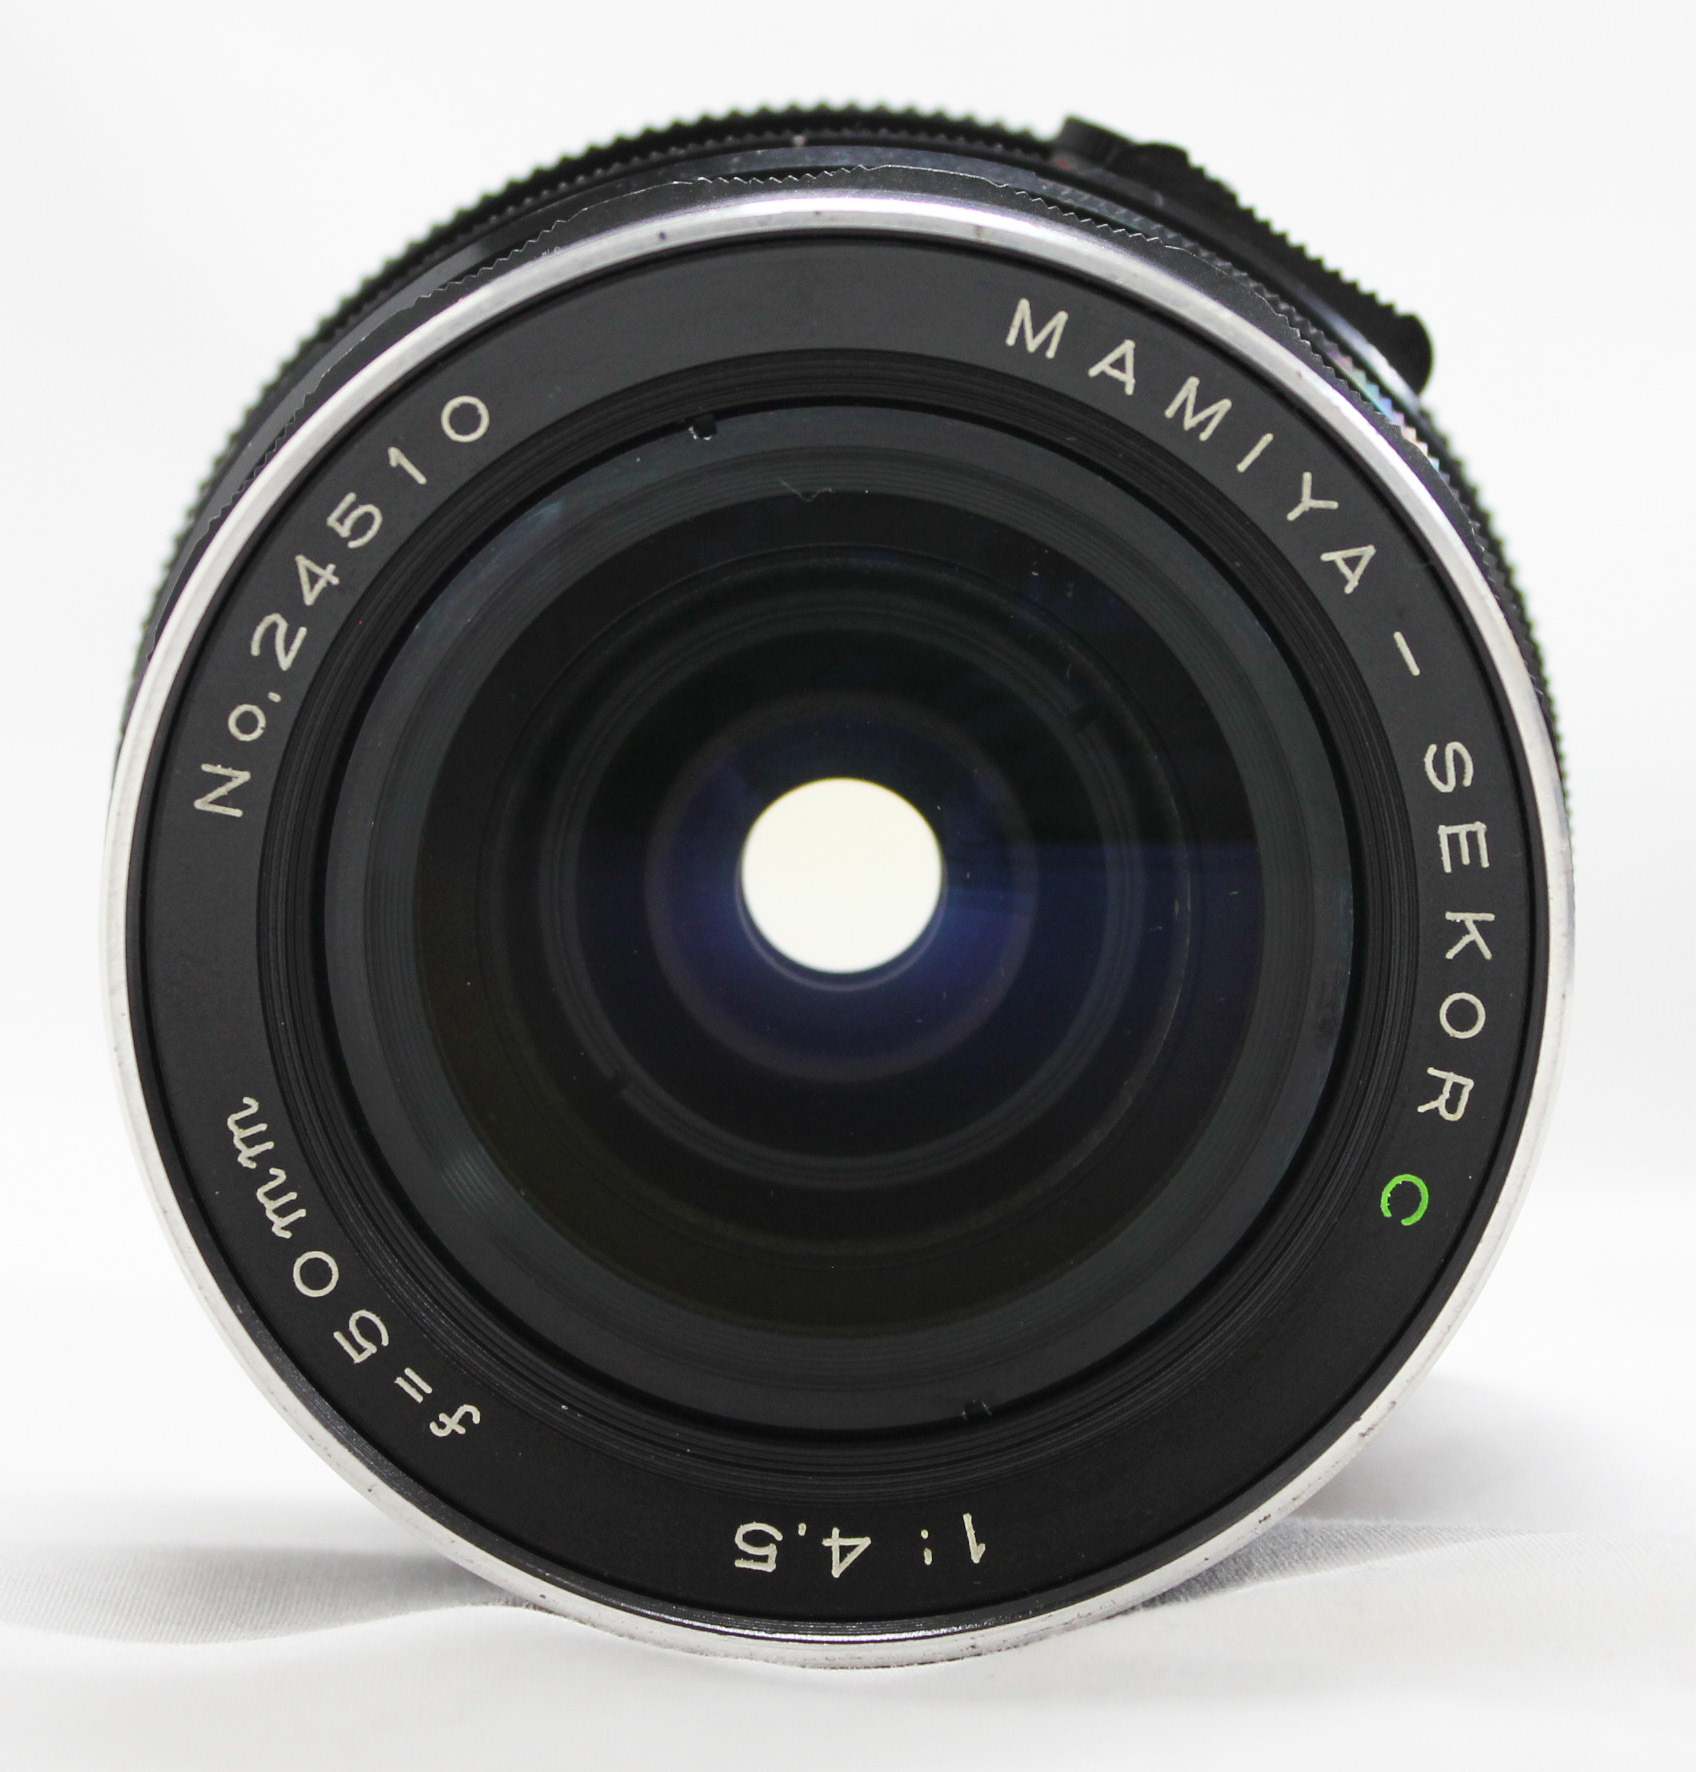  Mamiya Sekor C 50mm F/4.5 Wide Angle Lens for RB67 Pro S SD from Japan Photo 4